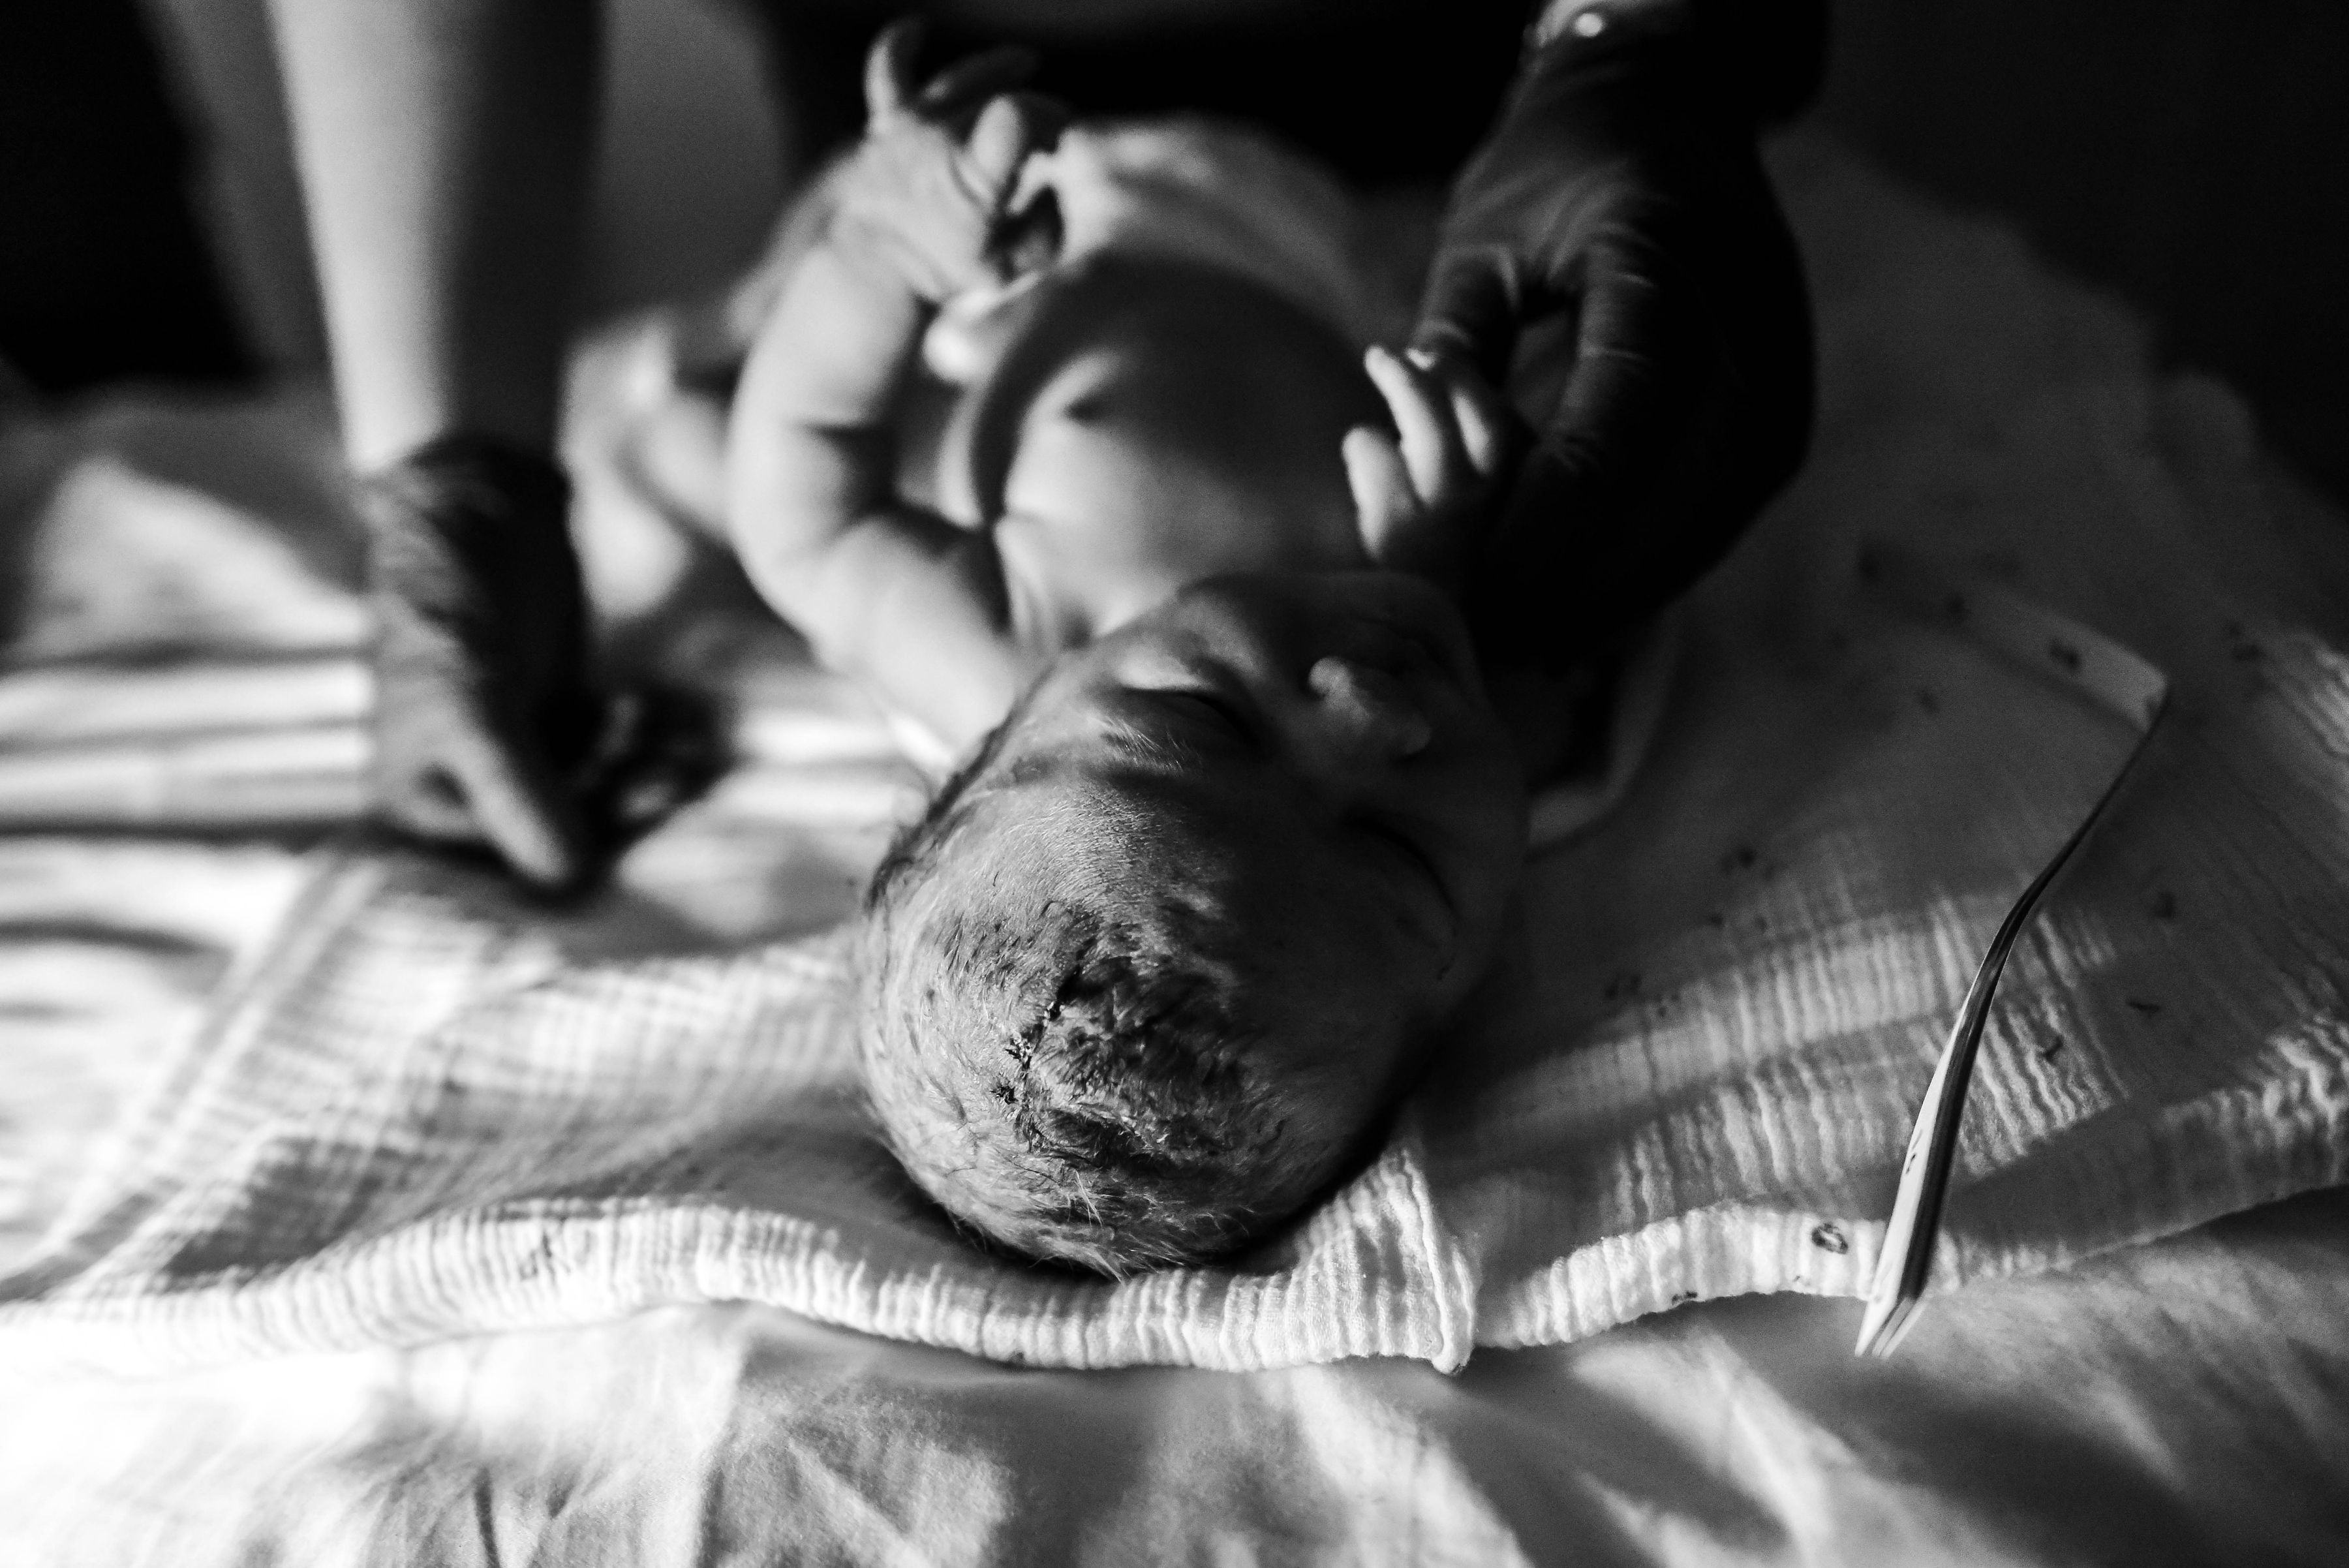 Black and white image of newborn baby lying on blanket while midwife exams